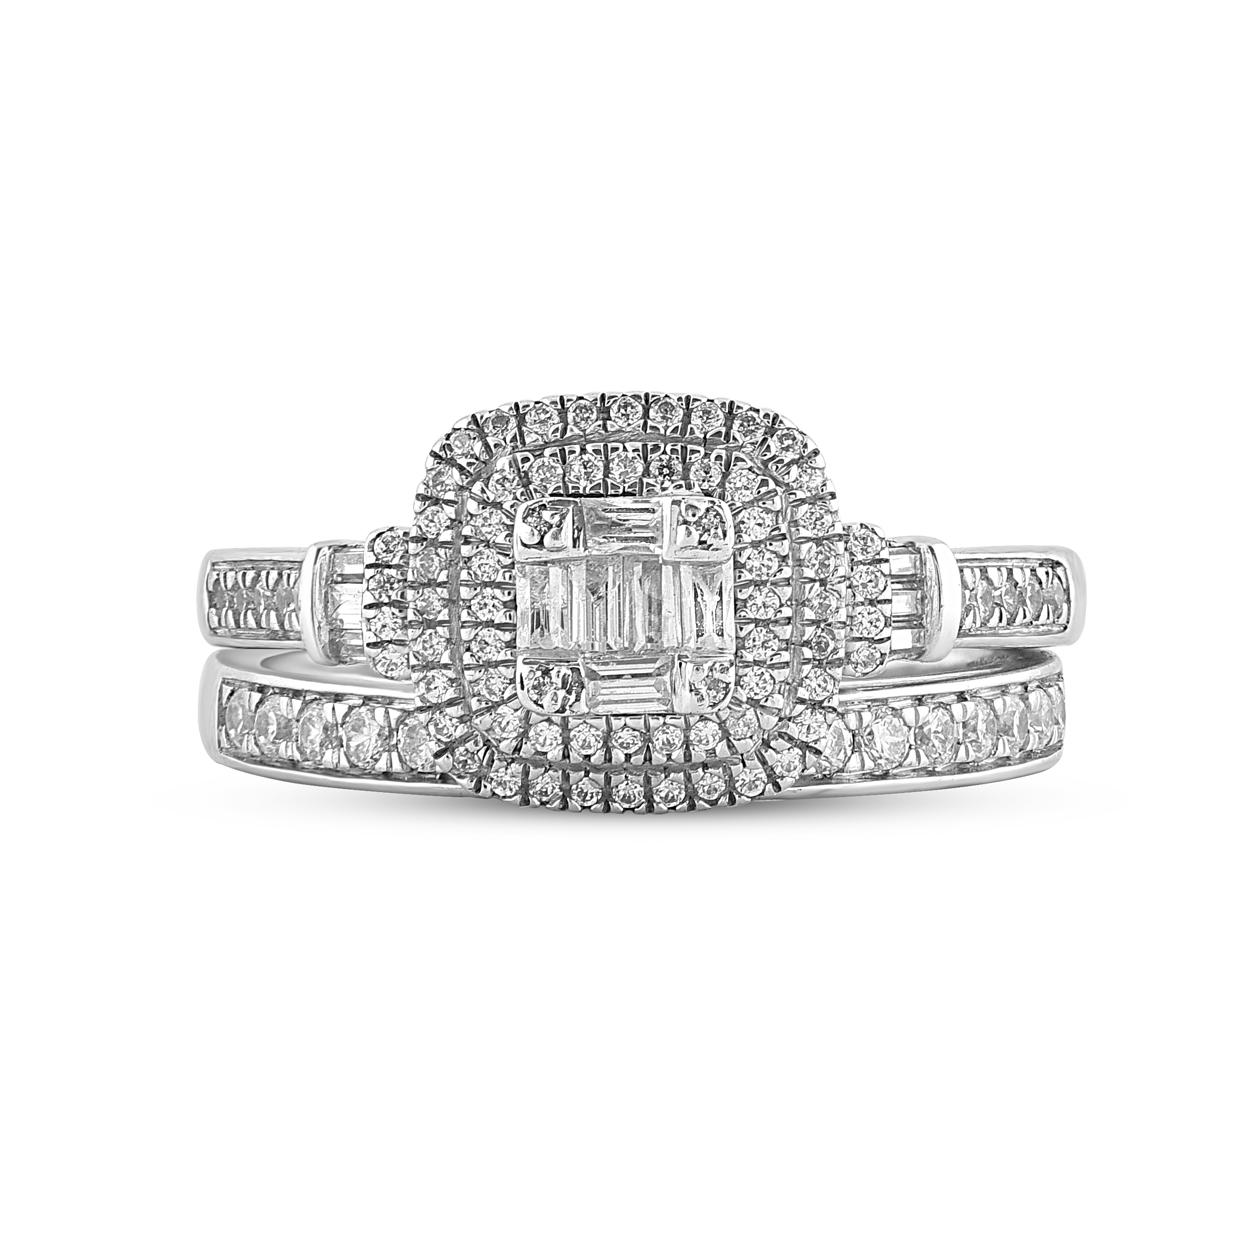 Give her a sophisticated reminder of your love with this diamond ring set. Crafted in 14 Karat white gold. This wedding ring features a sparkling 110 brilliant cut, single cut round diamonds and baguette cut diamonds beautifully set in prong, pave,